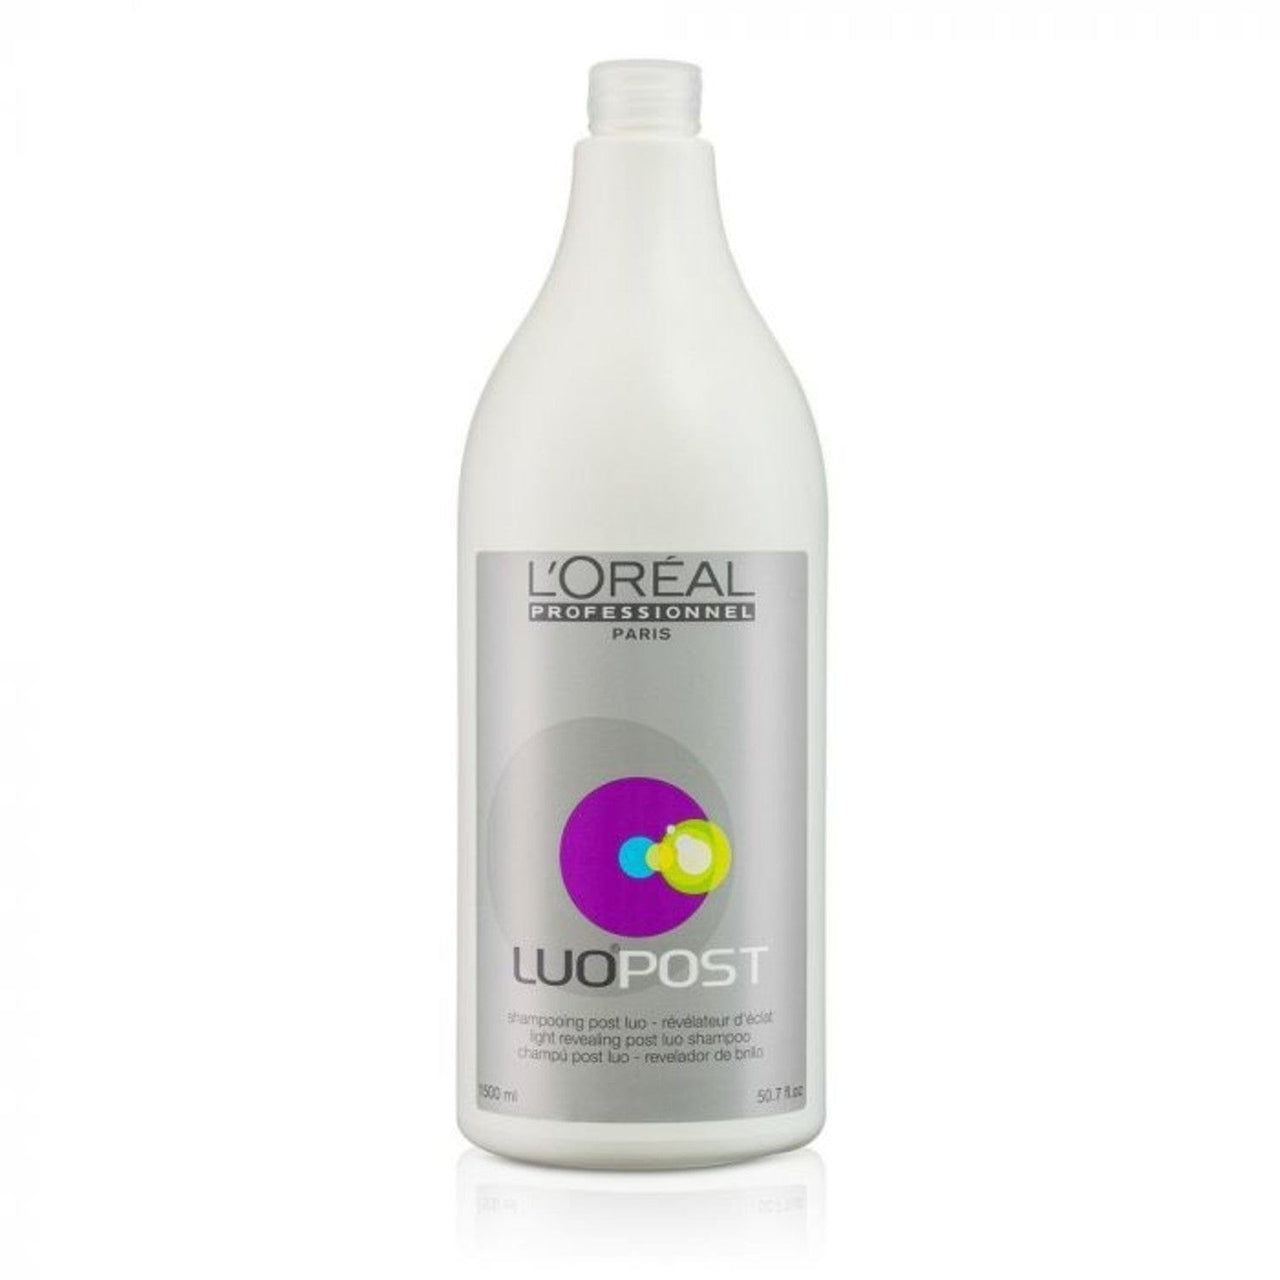 L'OREAL PROFESSIONNEL_Light Revealing Post Luo Shampoo 1.5L / 50.7oz_Cosmetic World